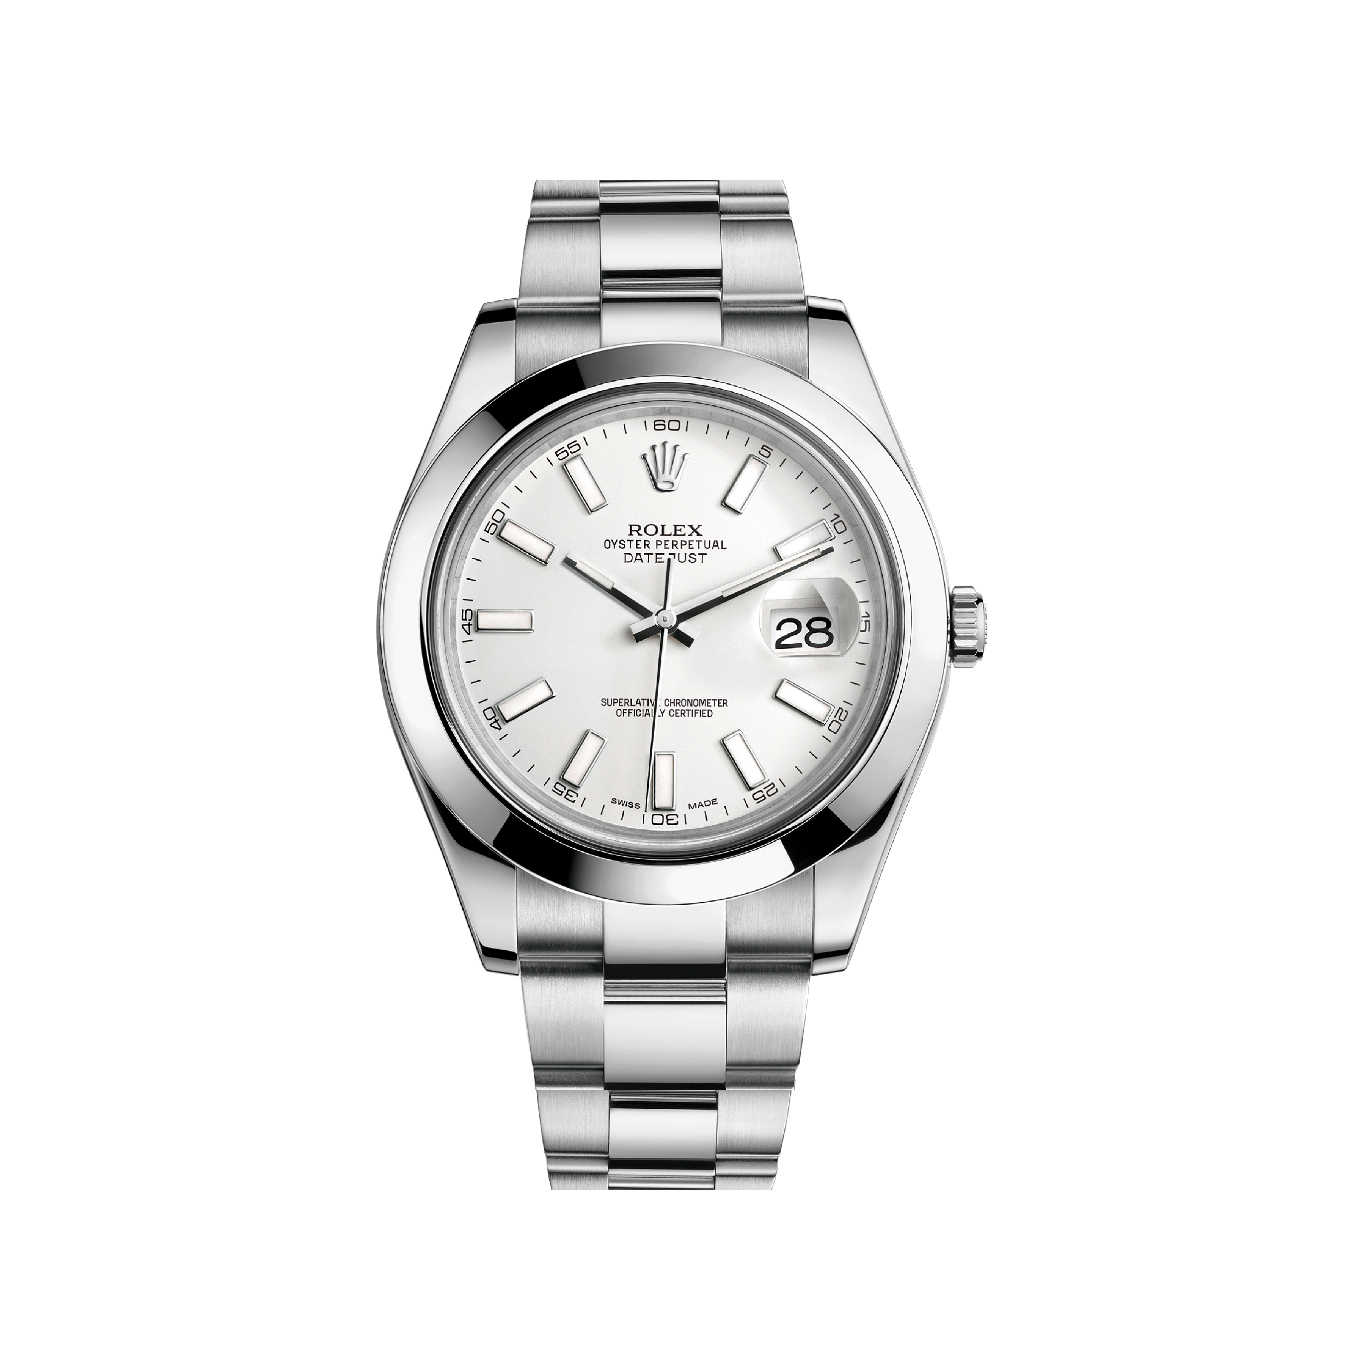 Datejust II 116300 Stainless Steel Watch (White)